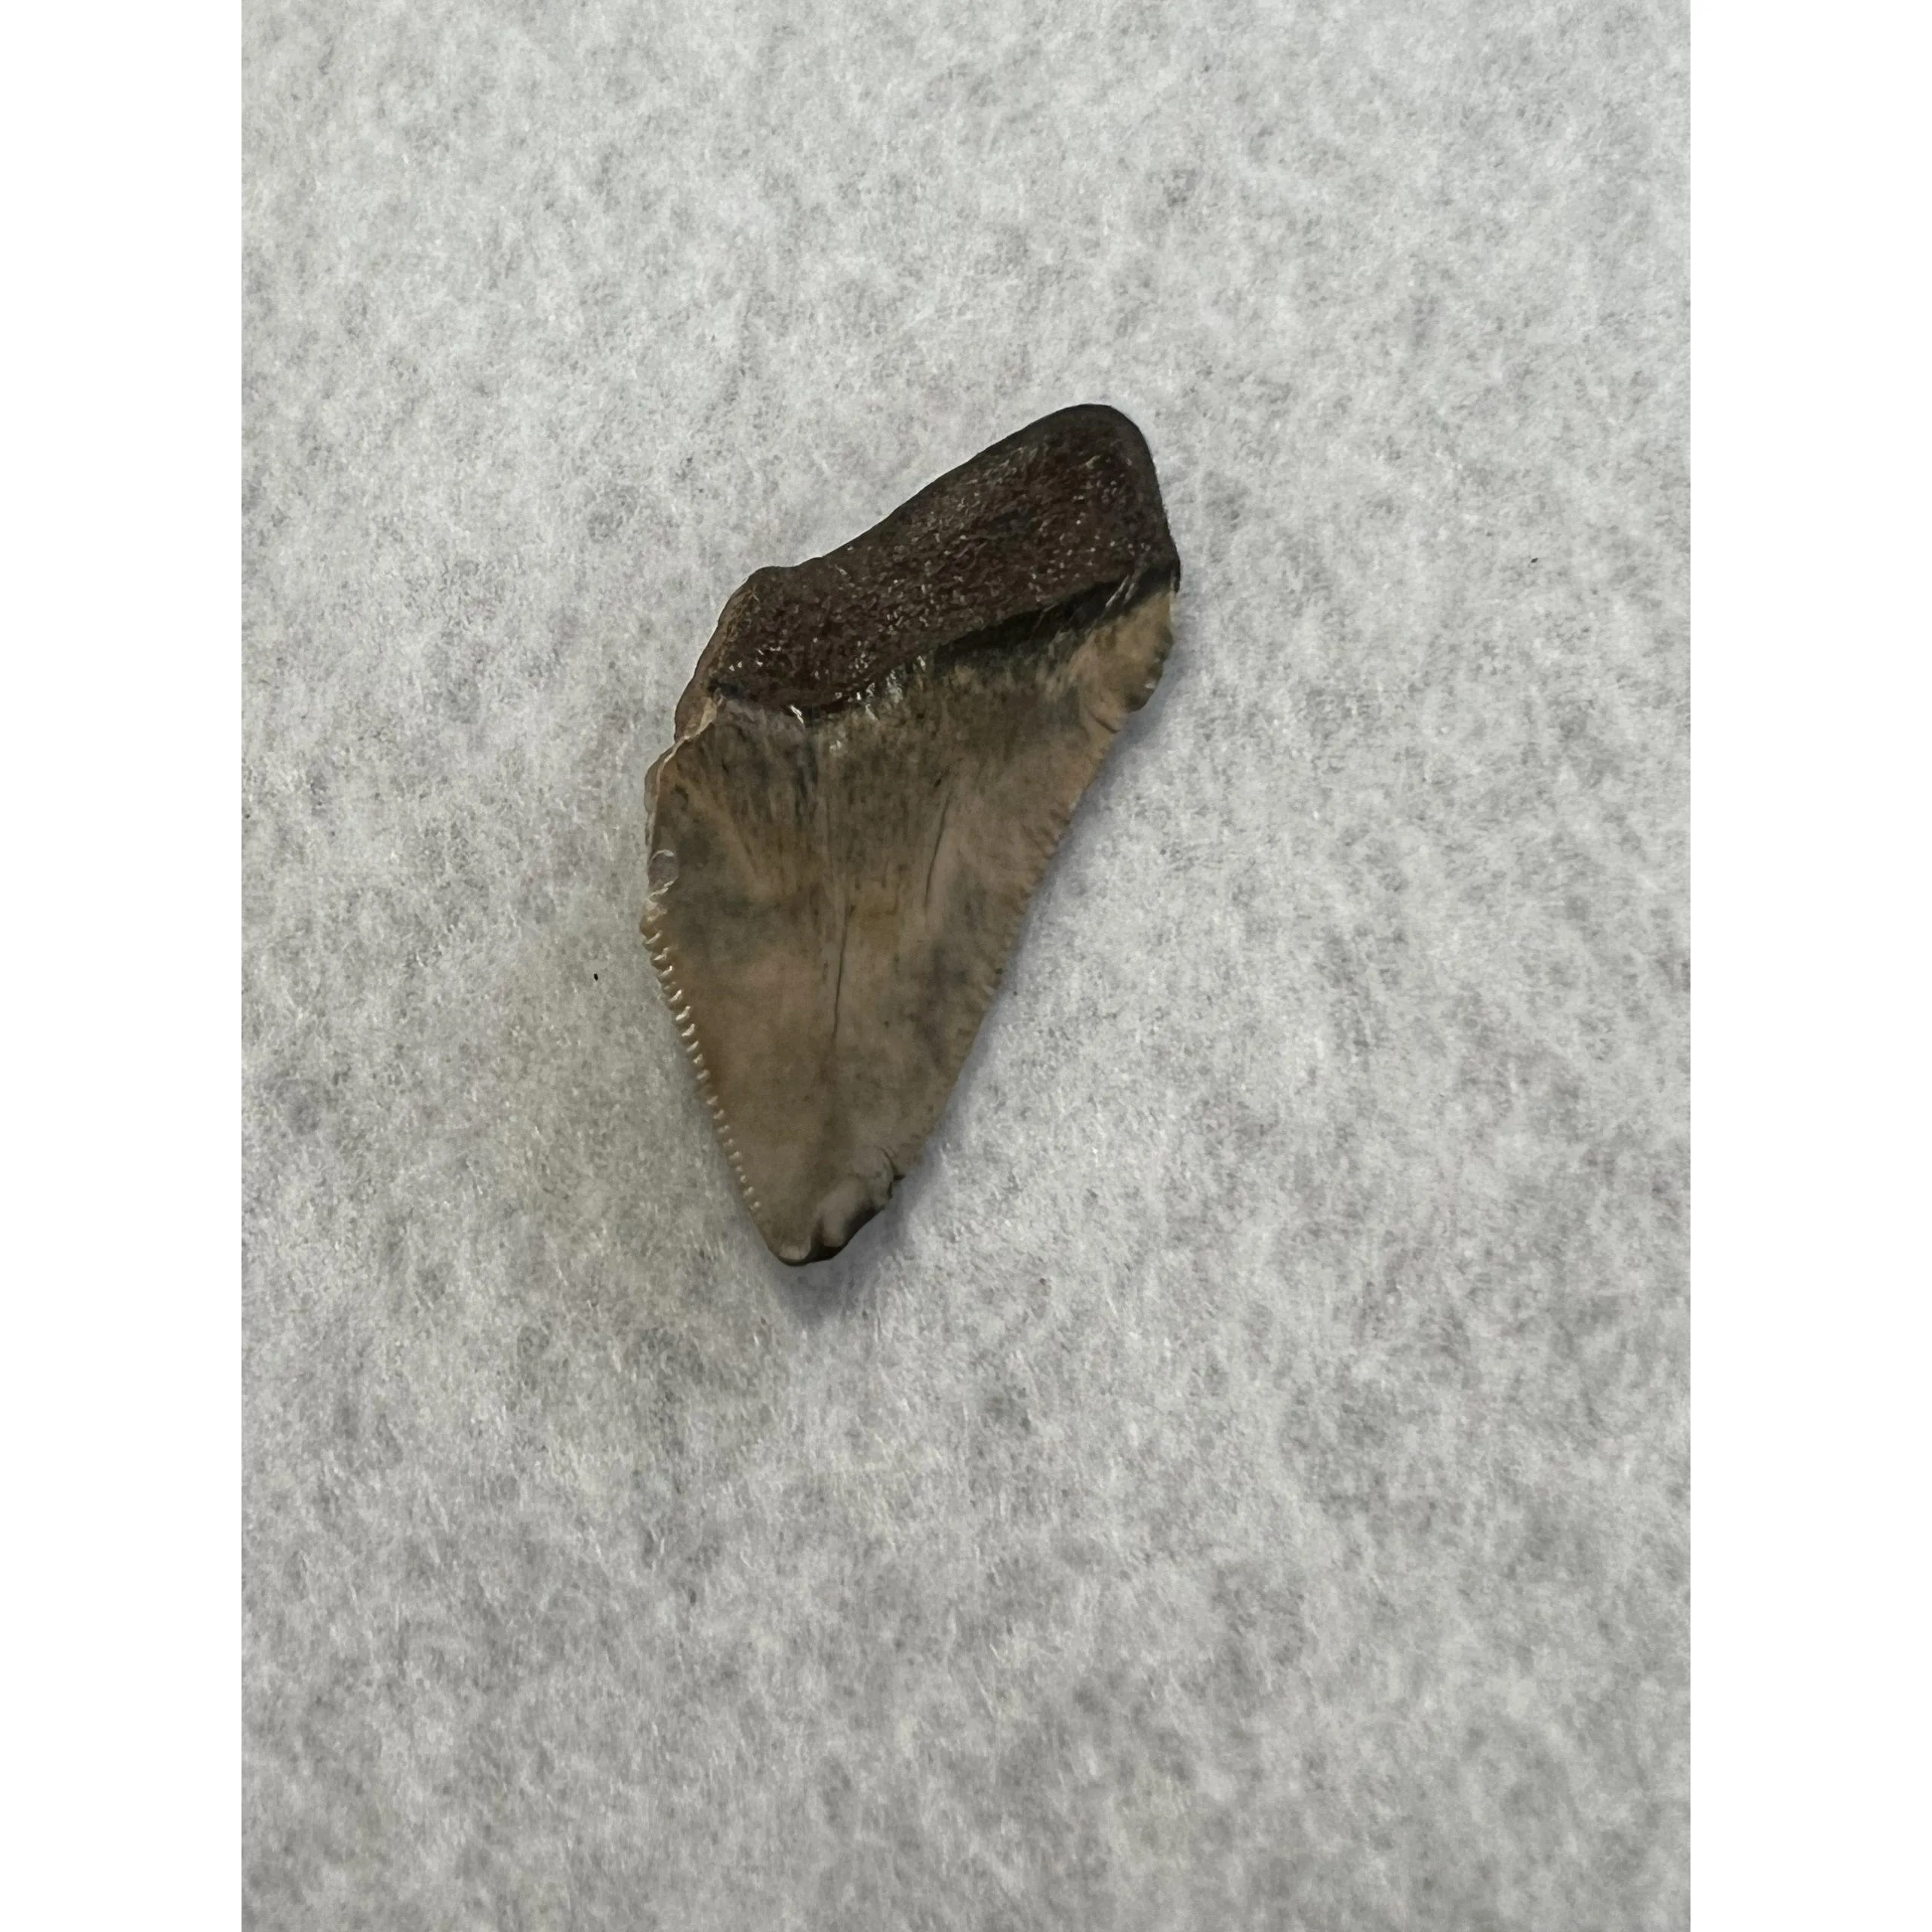 Megalodon Partial Tooth  South Carolina 1.90 inch Prehistoric Online